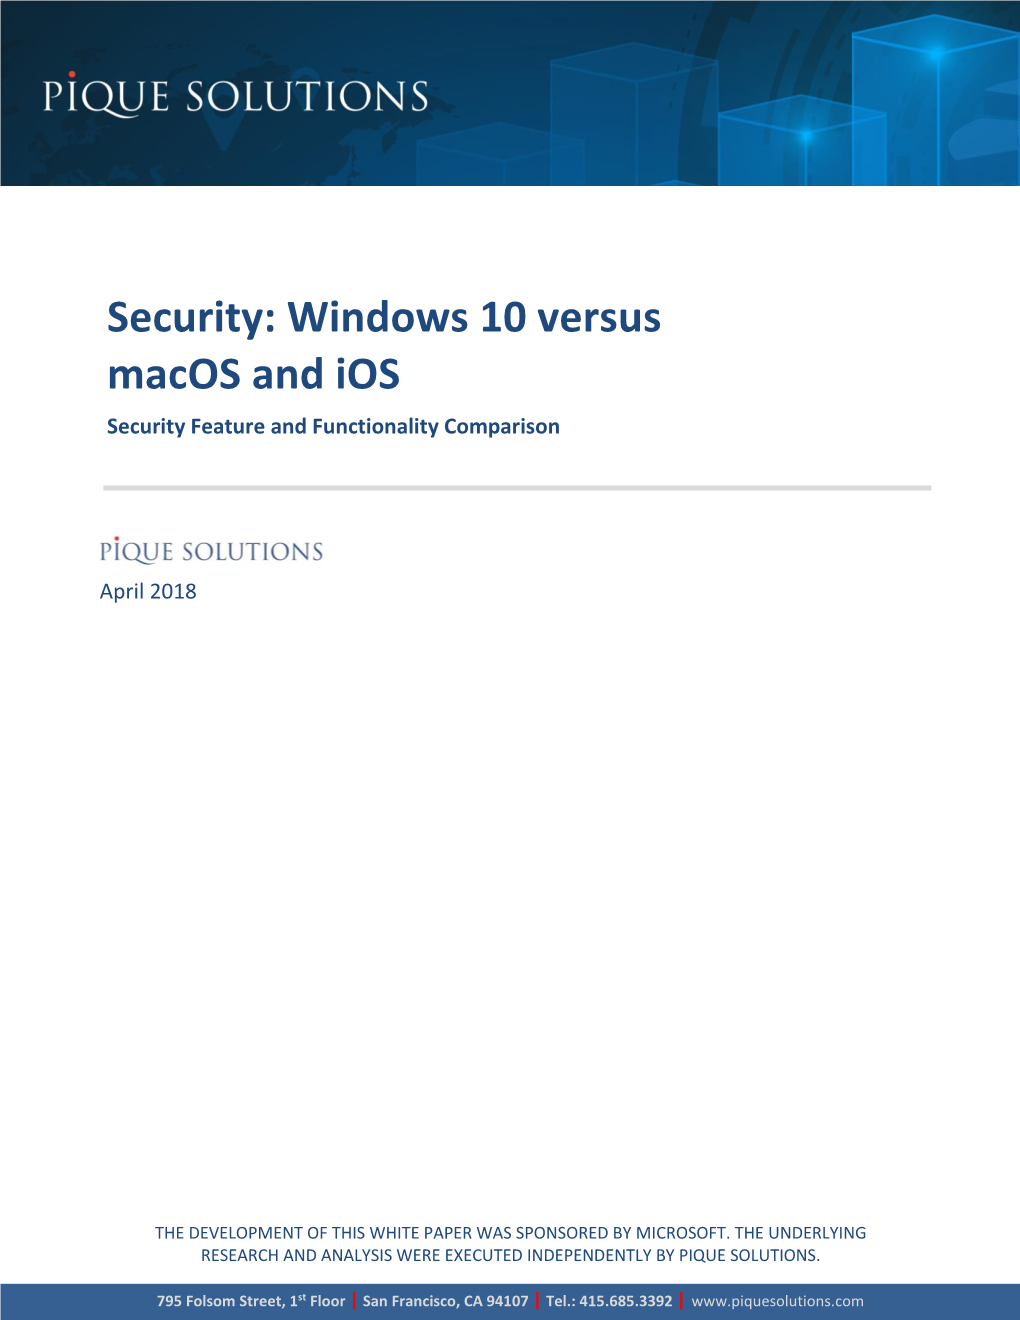 Security of Windows 10 Vs. Macos And